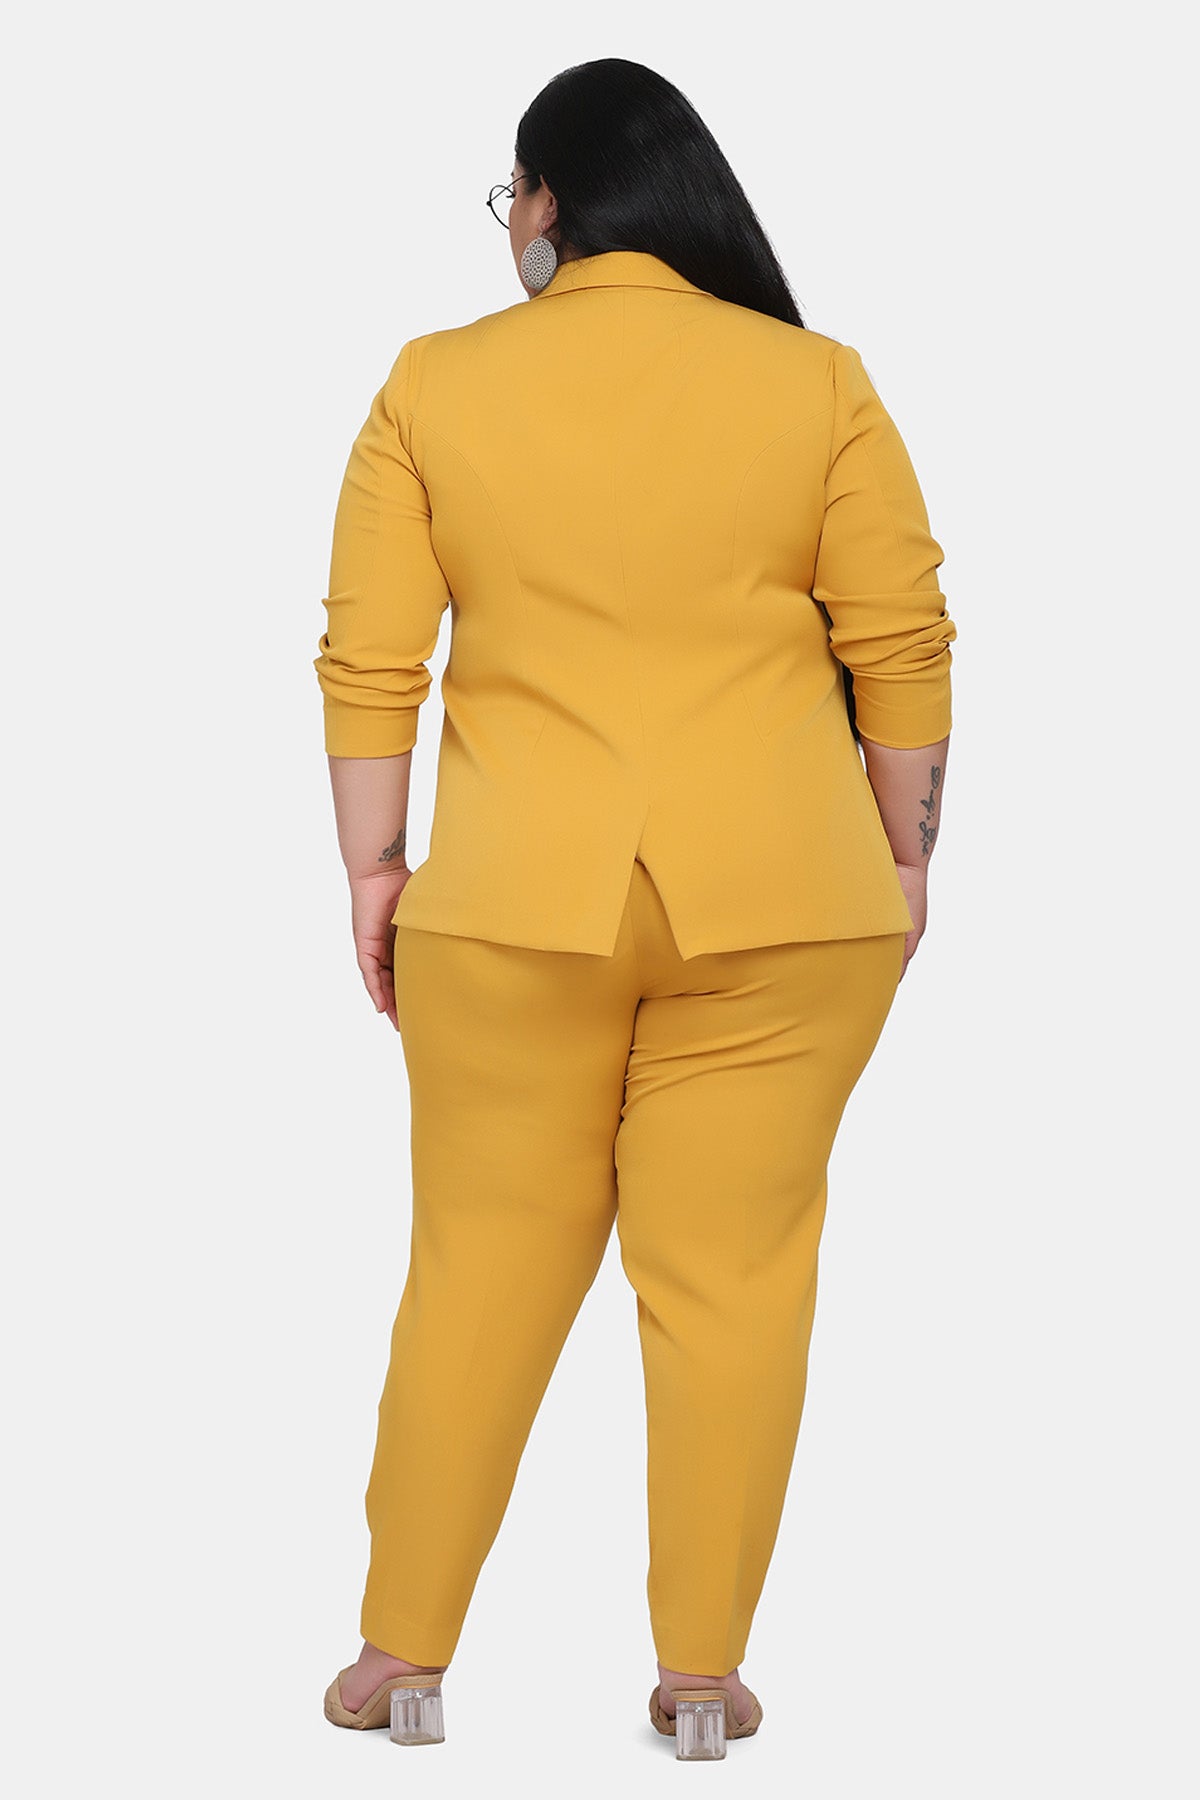 Yellow Casual Pant Suit